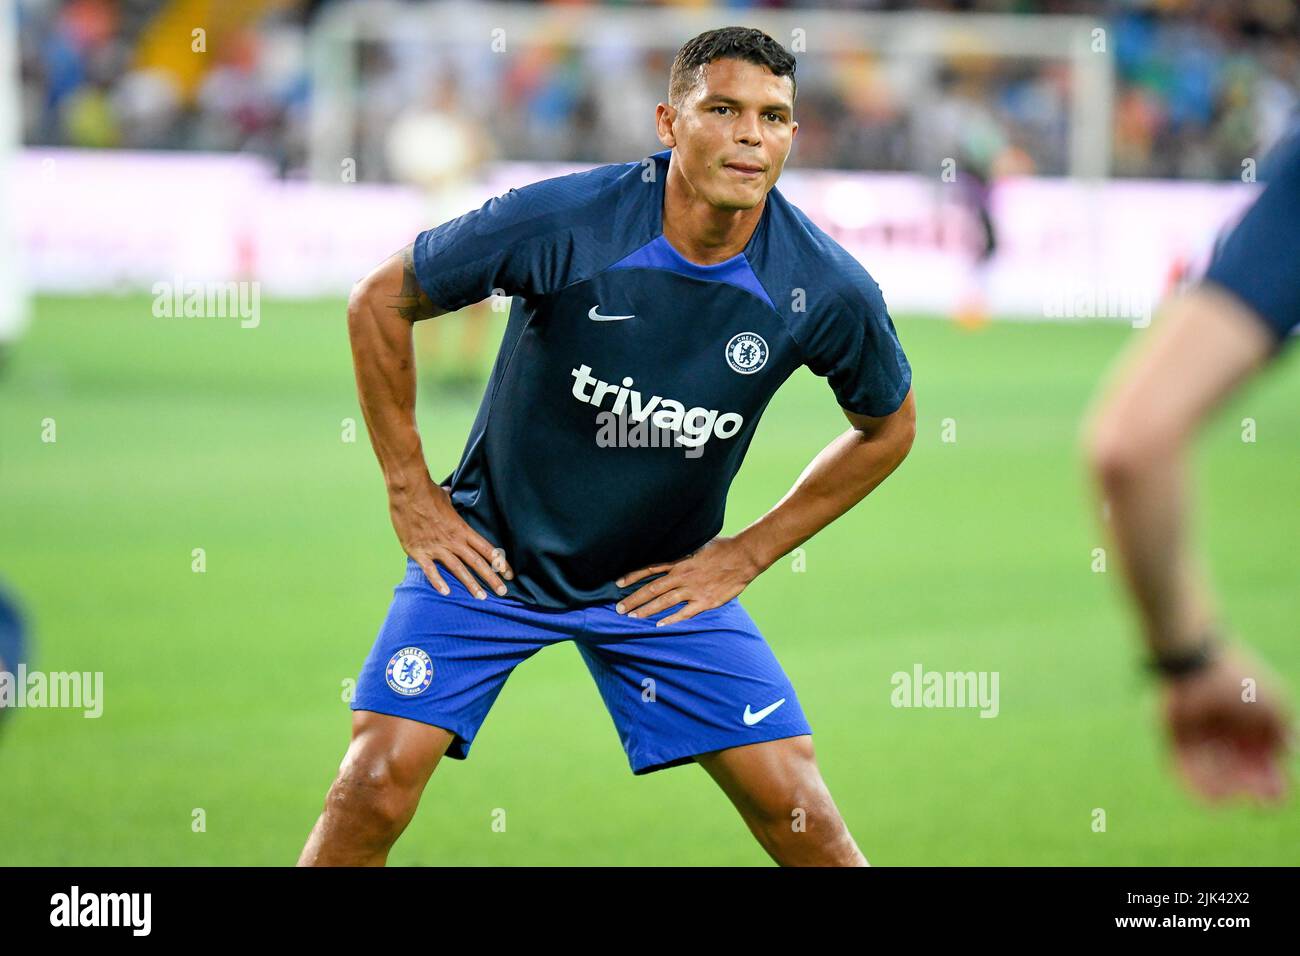 Udine, Italy. 29th July, 2022. Chelsea's Thiago Silva portrait during  Udinese Calcio vs Chelsea FC, friendly football match in Udine, Italy, July  29 2022 Credit: Independent Photo Agency/Alamy Live News Stock Photo - Alamy